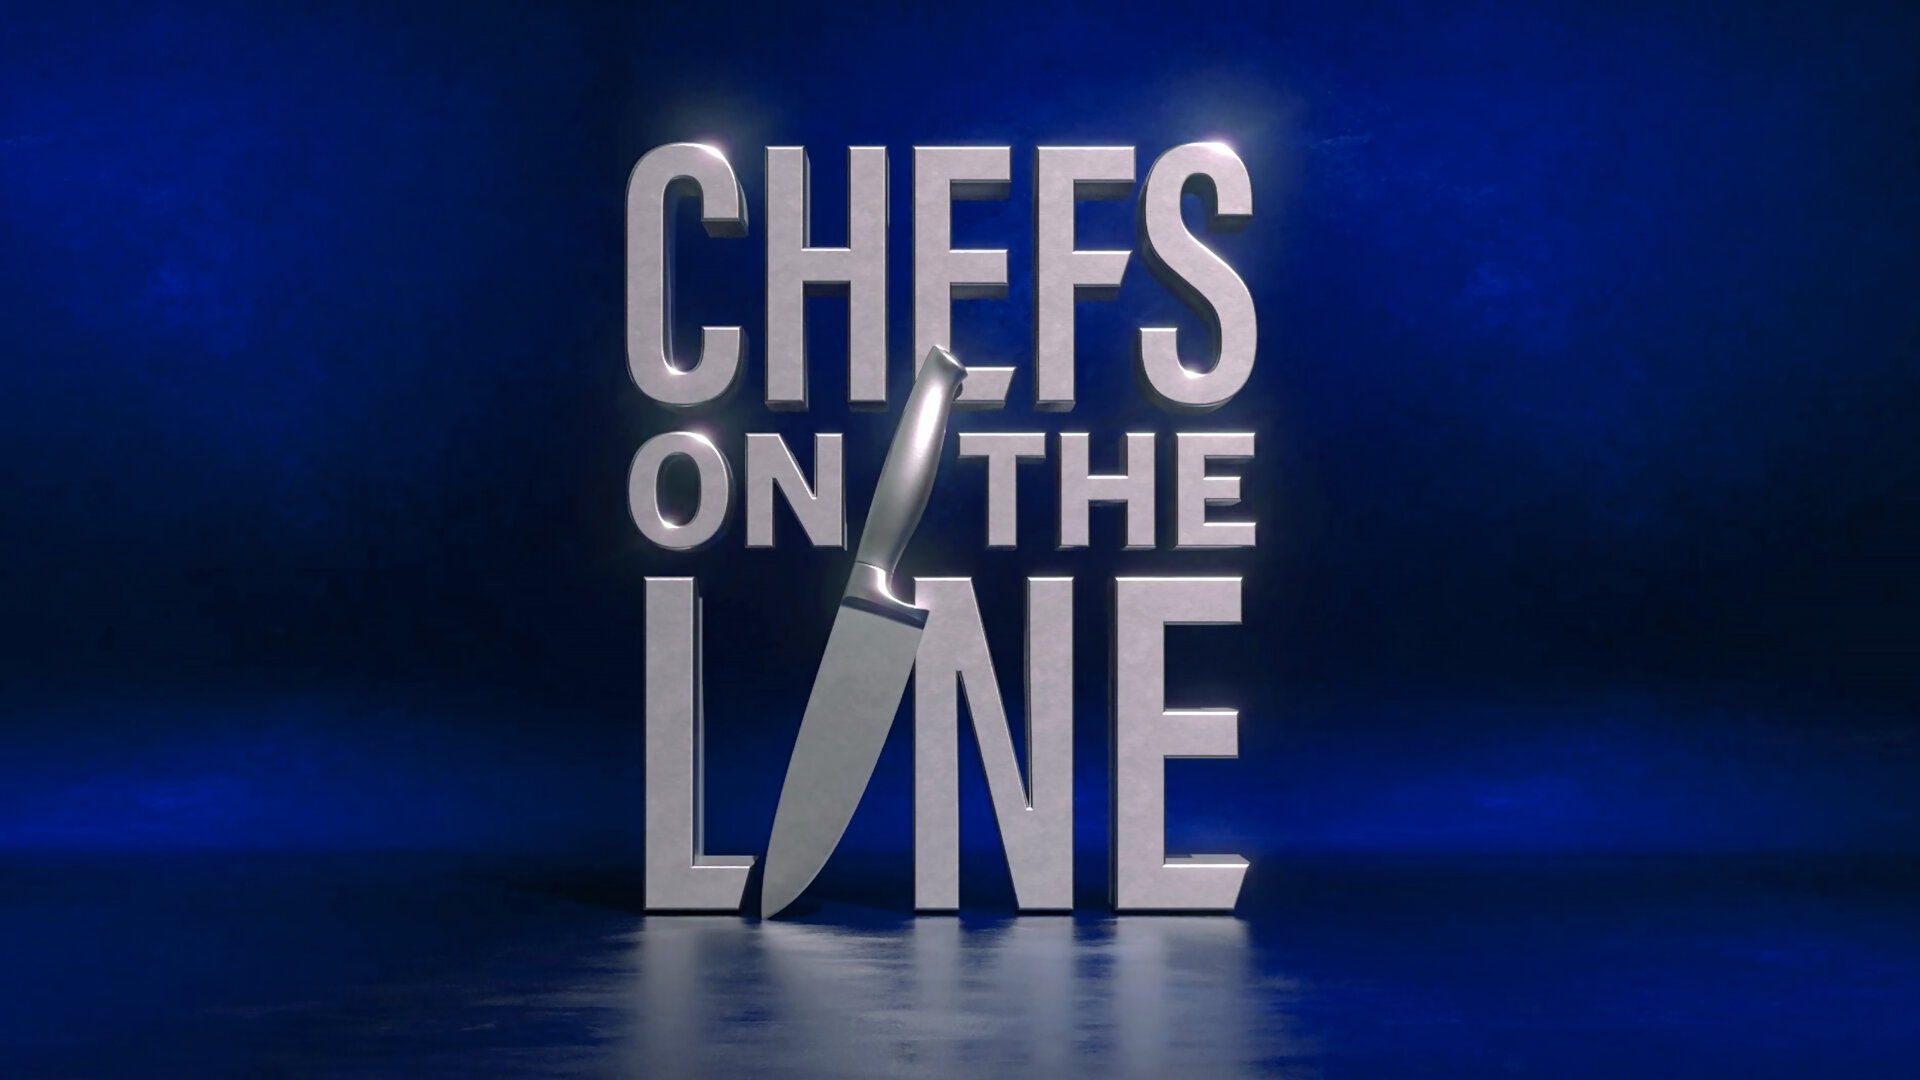 Silver Chefs on the Line logo on a dark blue background